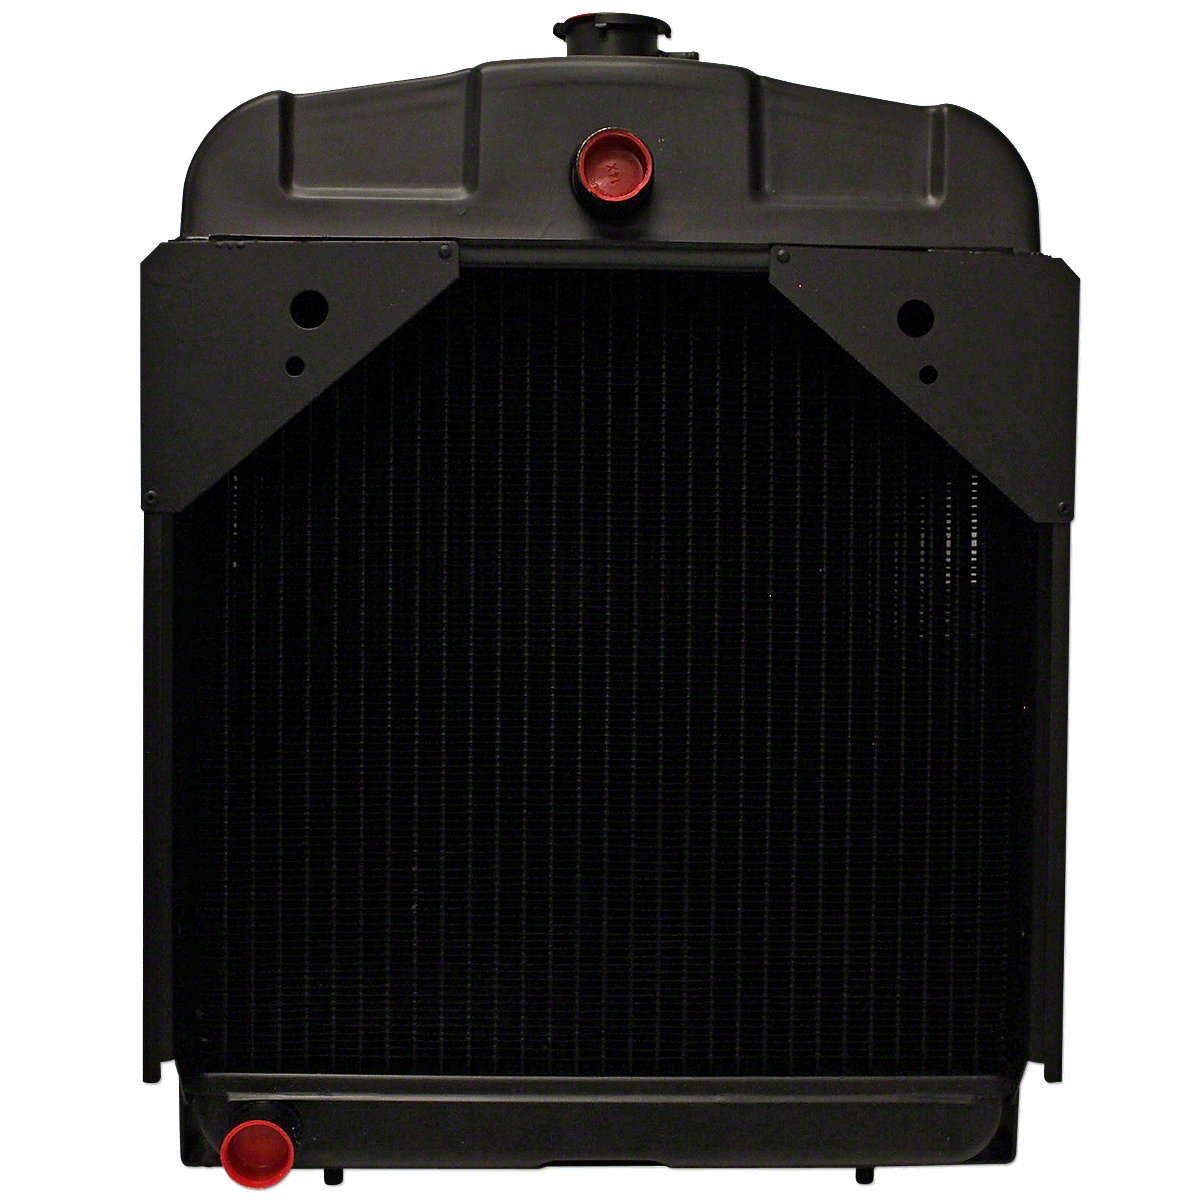 New Radiator For Allis Chalmers: B, C, CA, D10, D12.